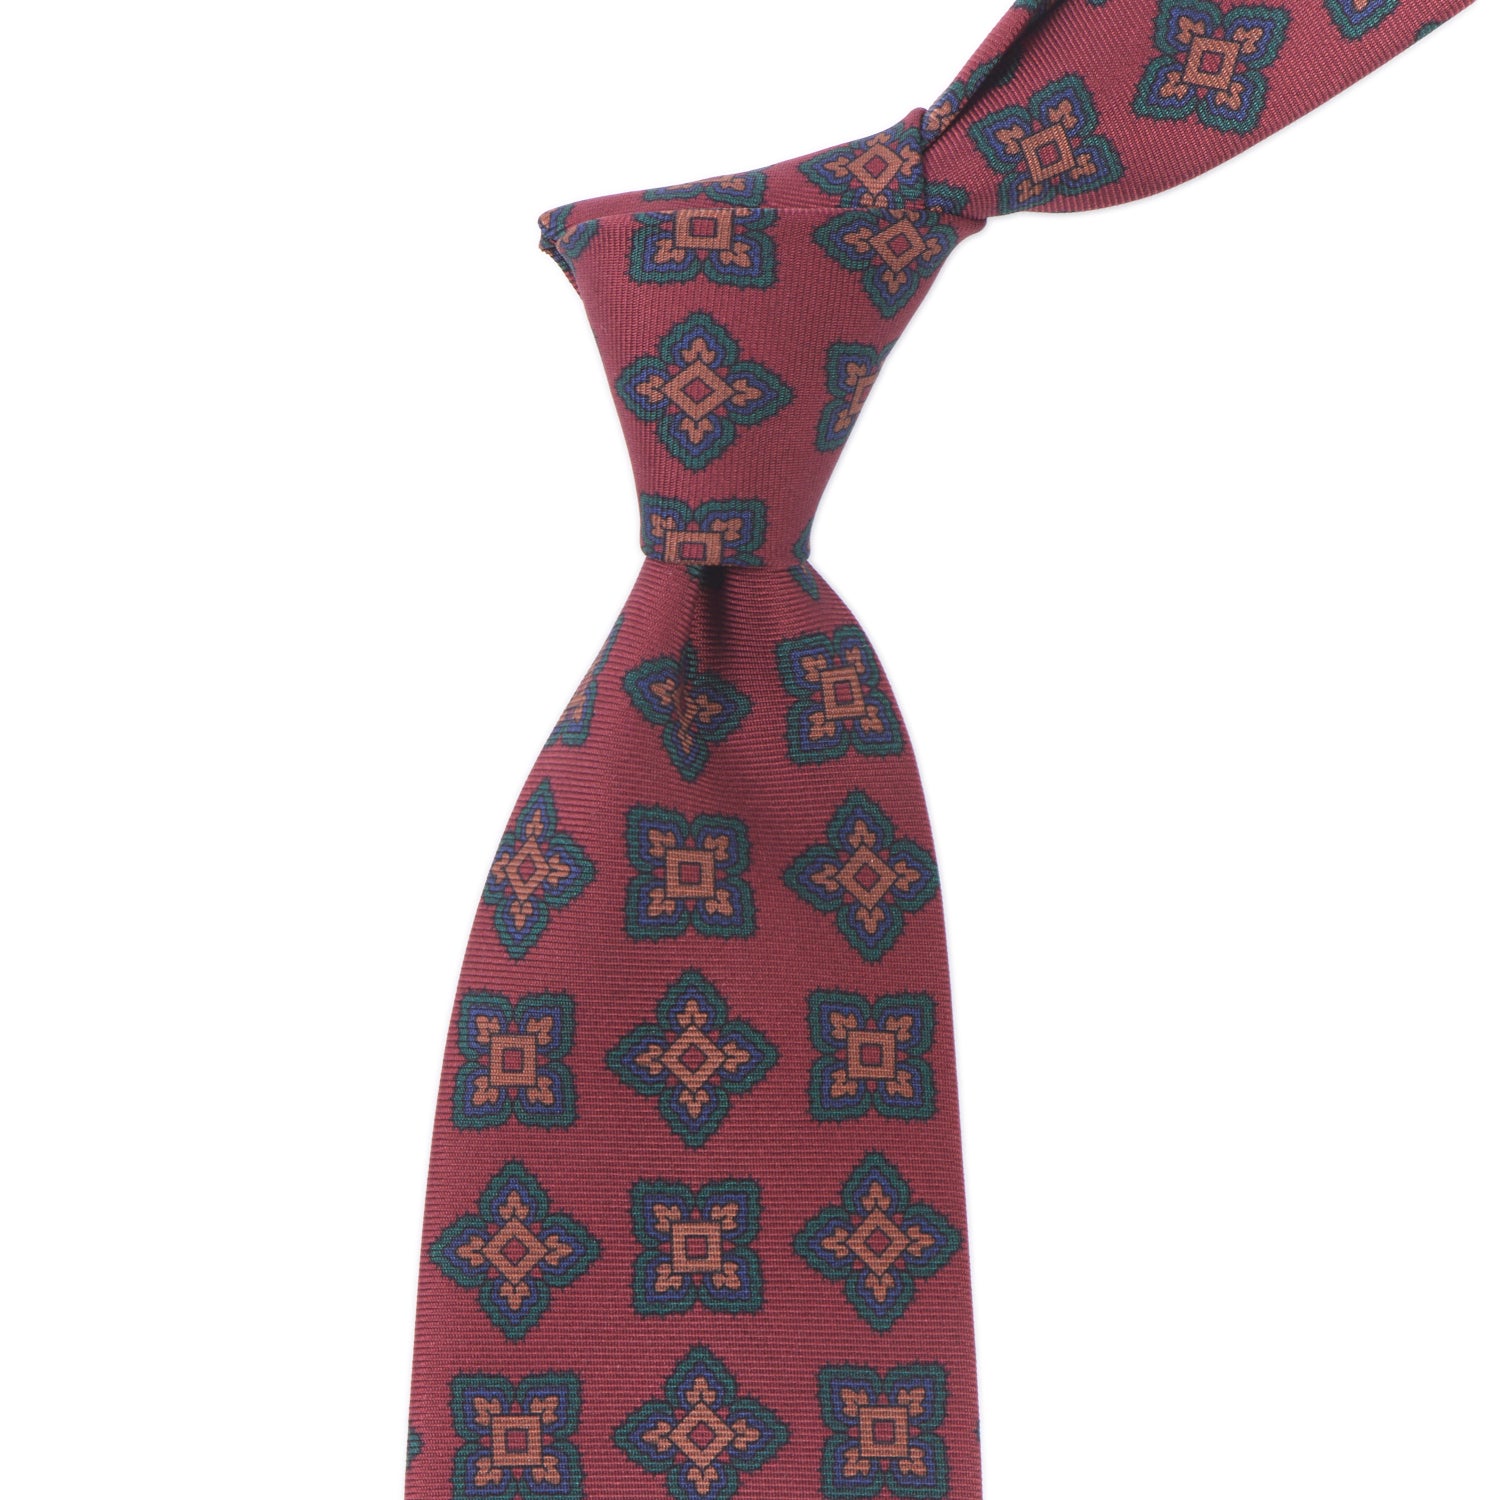 A high-quality Sovereign Grade Rust Large Medallion Ancient Madder tie, 150cm by KirbyAllison.com with intricate black and blue designs.